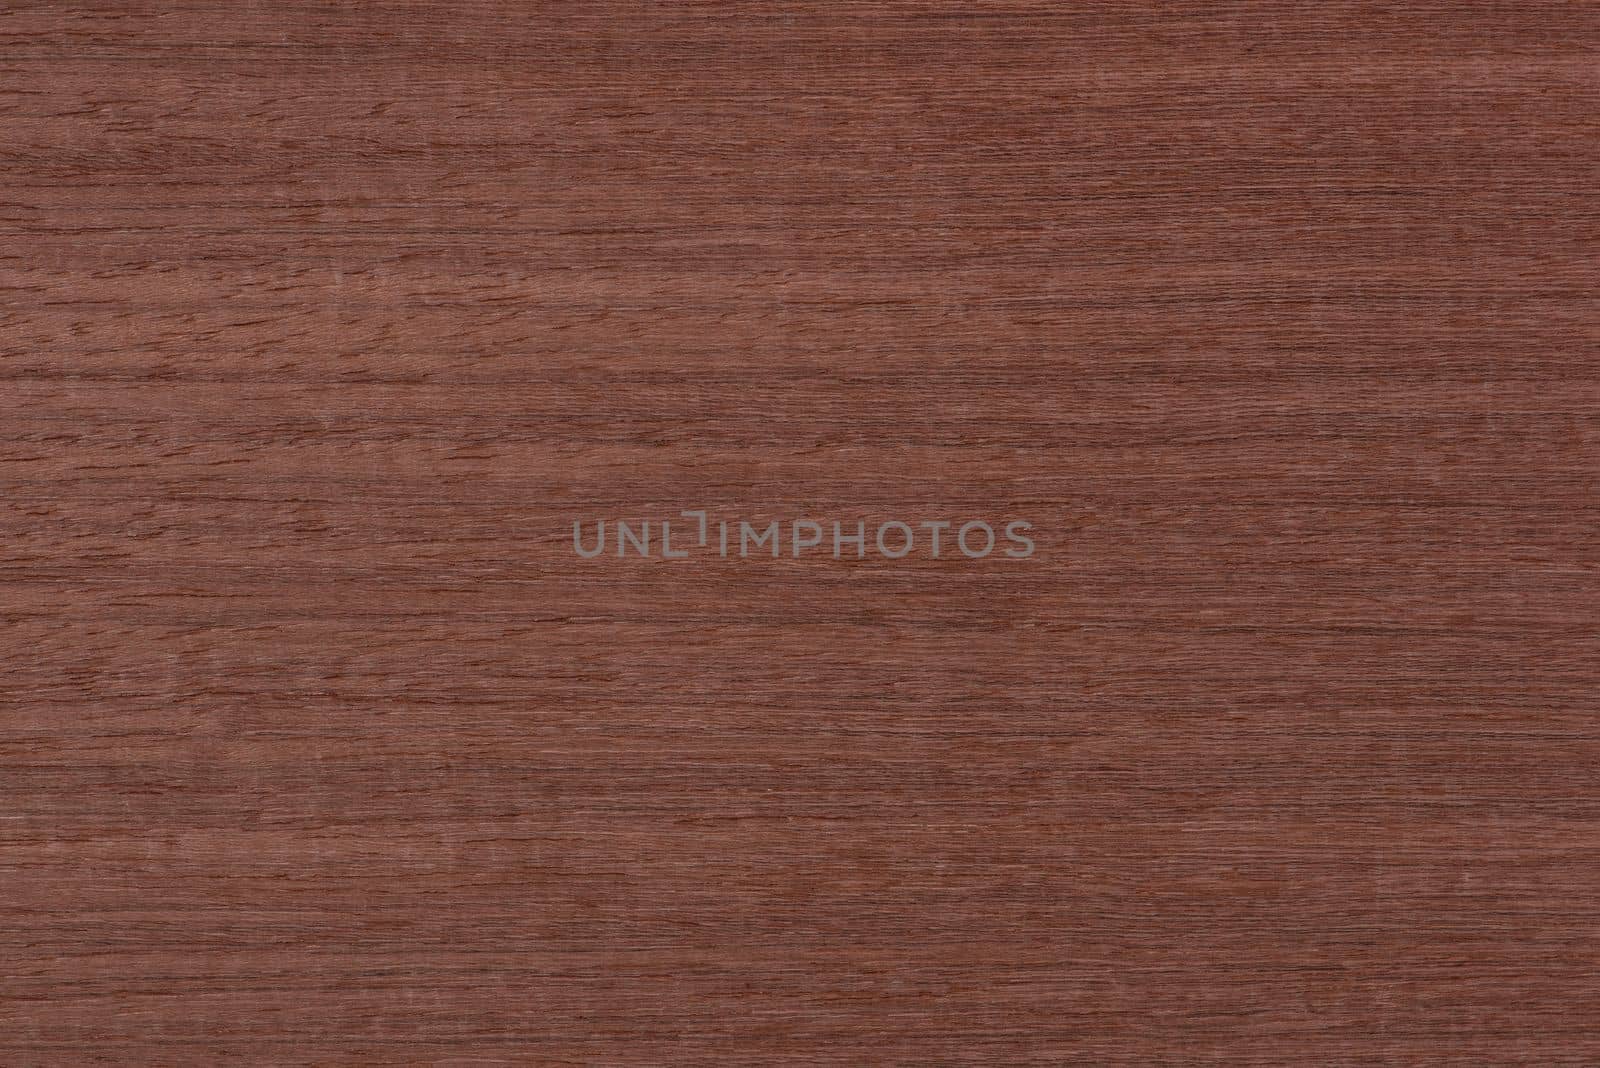 Texture of mahogany. Texture of koto wood with a reddish brown tint. Exotic rare wood from Africa for the production of expensive furniture or interior elements by SERSOL